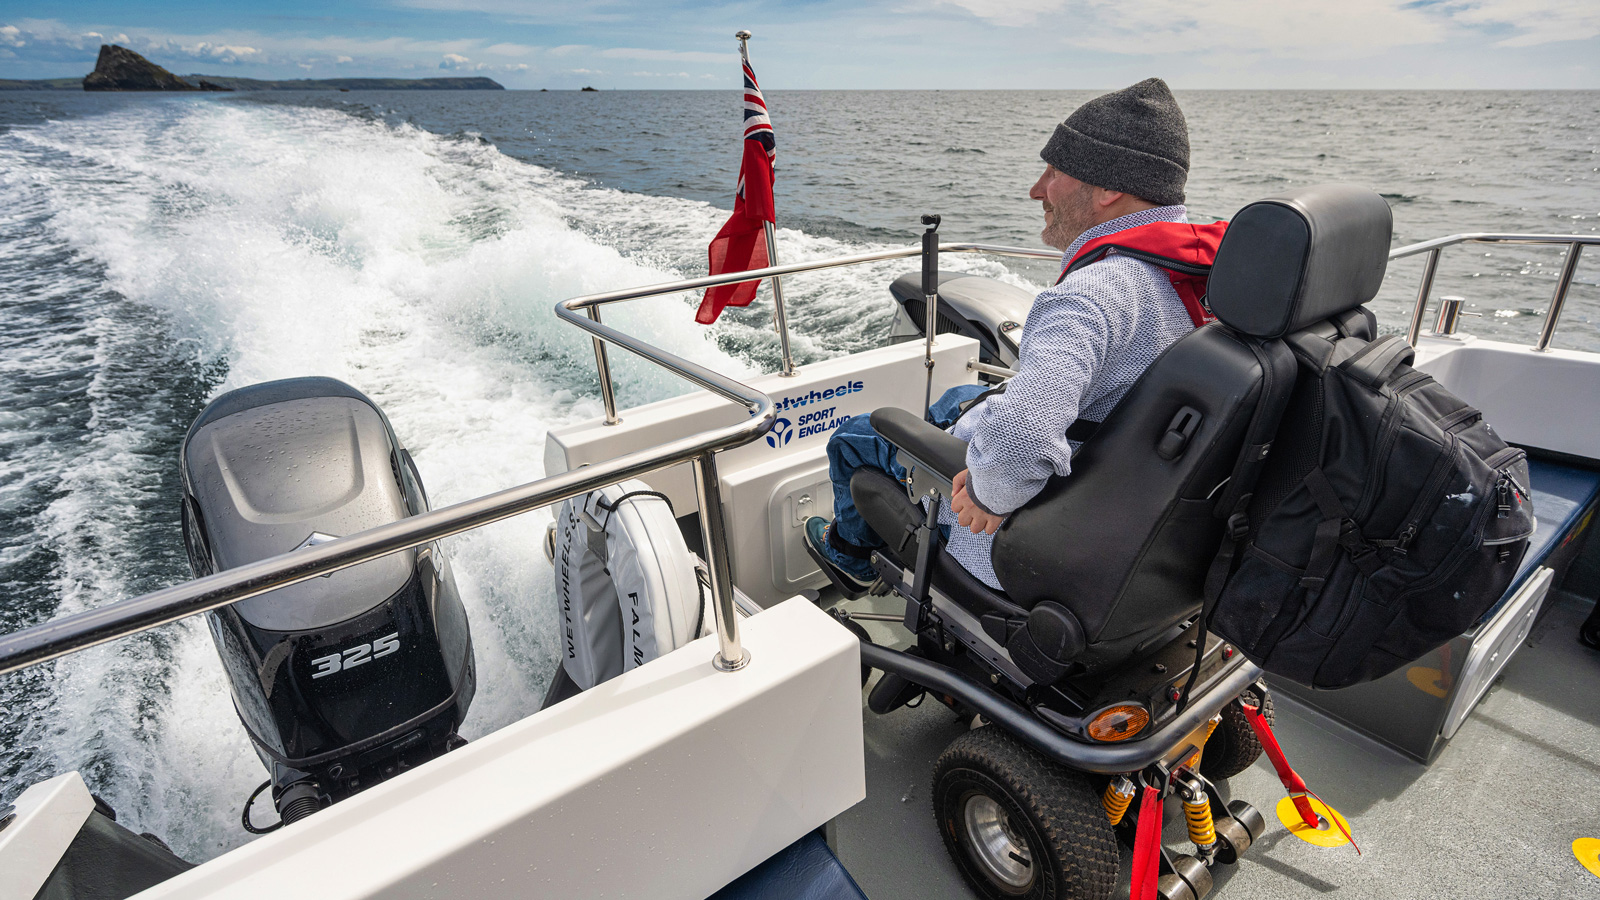 Steven Webb having a mindful moment on WetWheels boat Cornwall looking out over the Falmouth Bay in his electric wheelchair